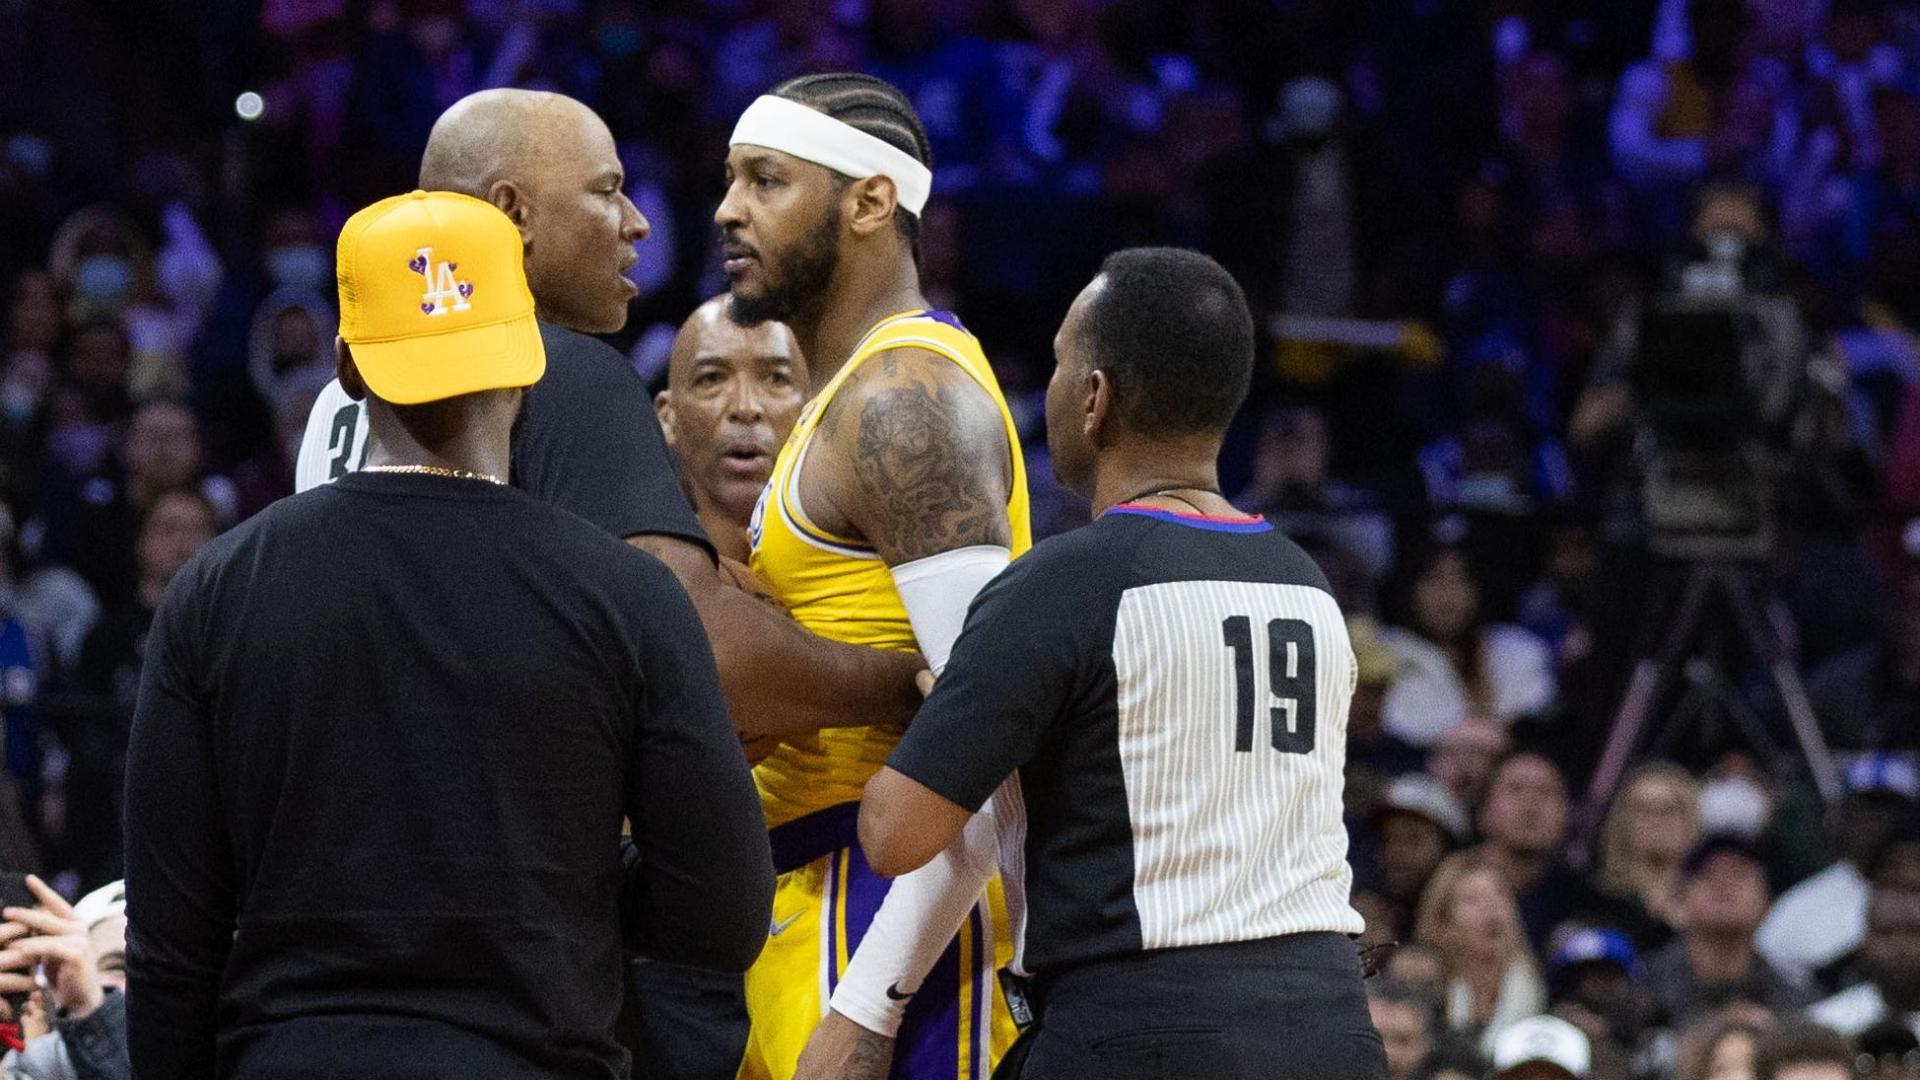 Fan ejected after altercation with Melo